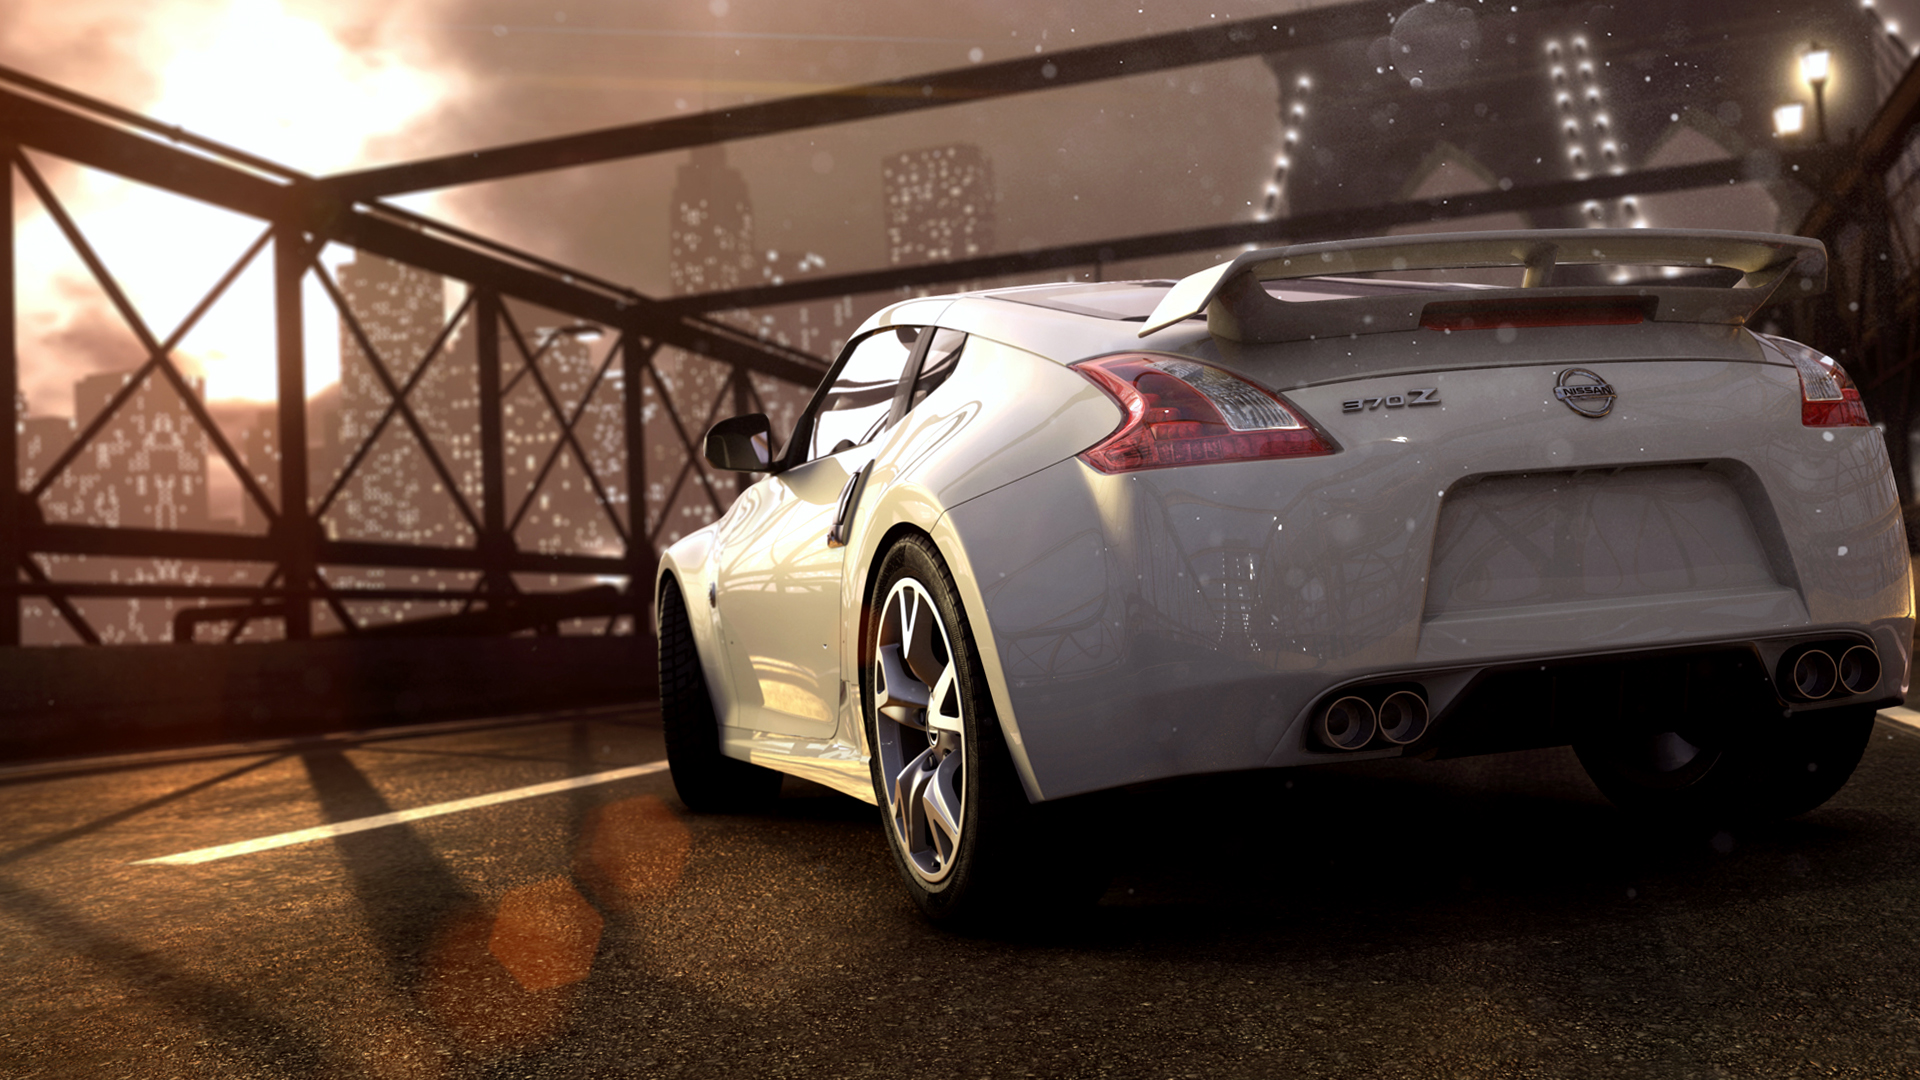  Car  The Crew Game  Wallpapers  HD  Desktop and Mobile 